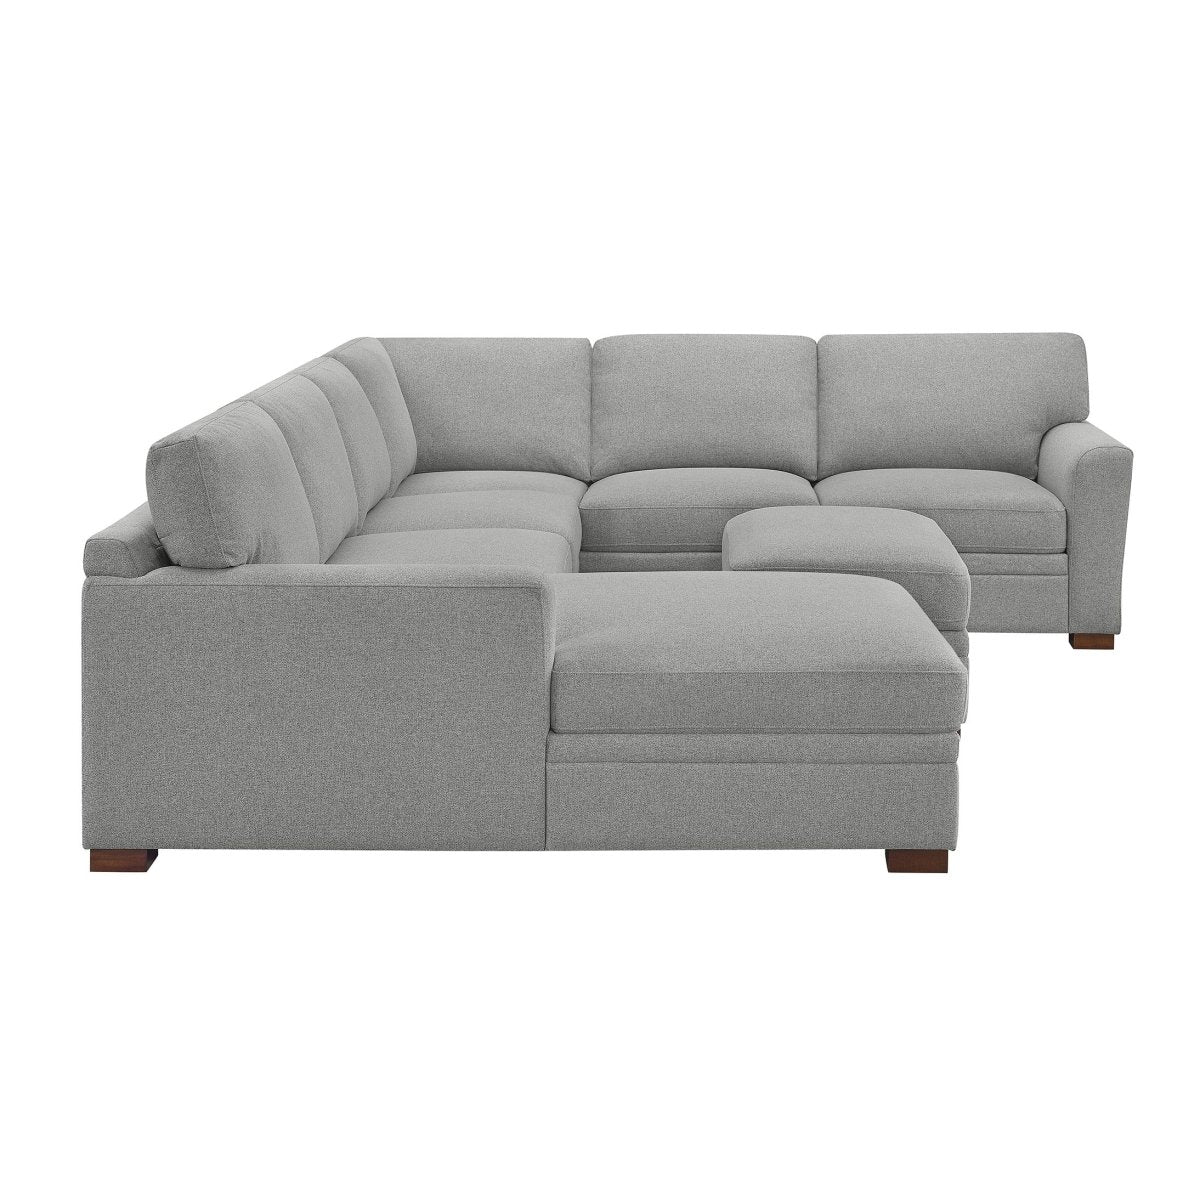 Thomasville Langdon Fabric Sectional with Storage Ottoman - Alpine Outlets